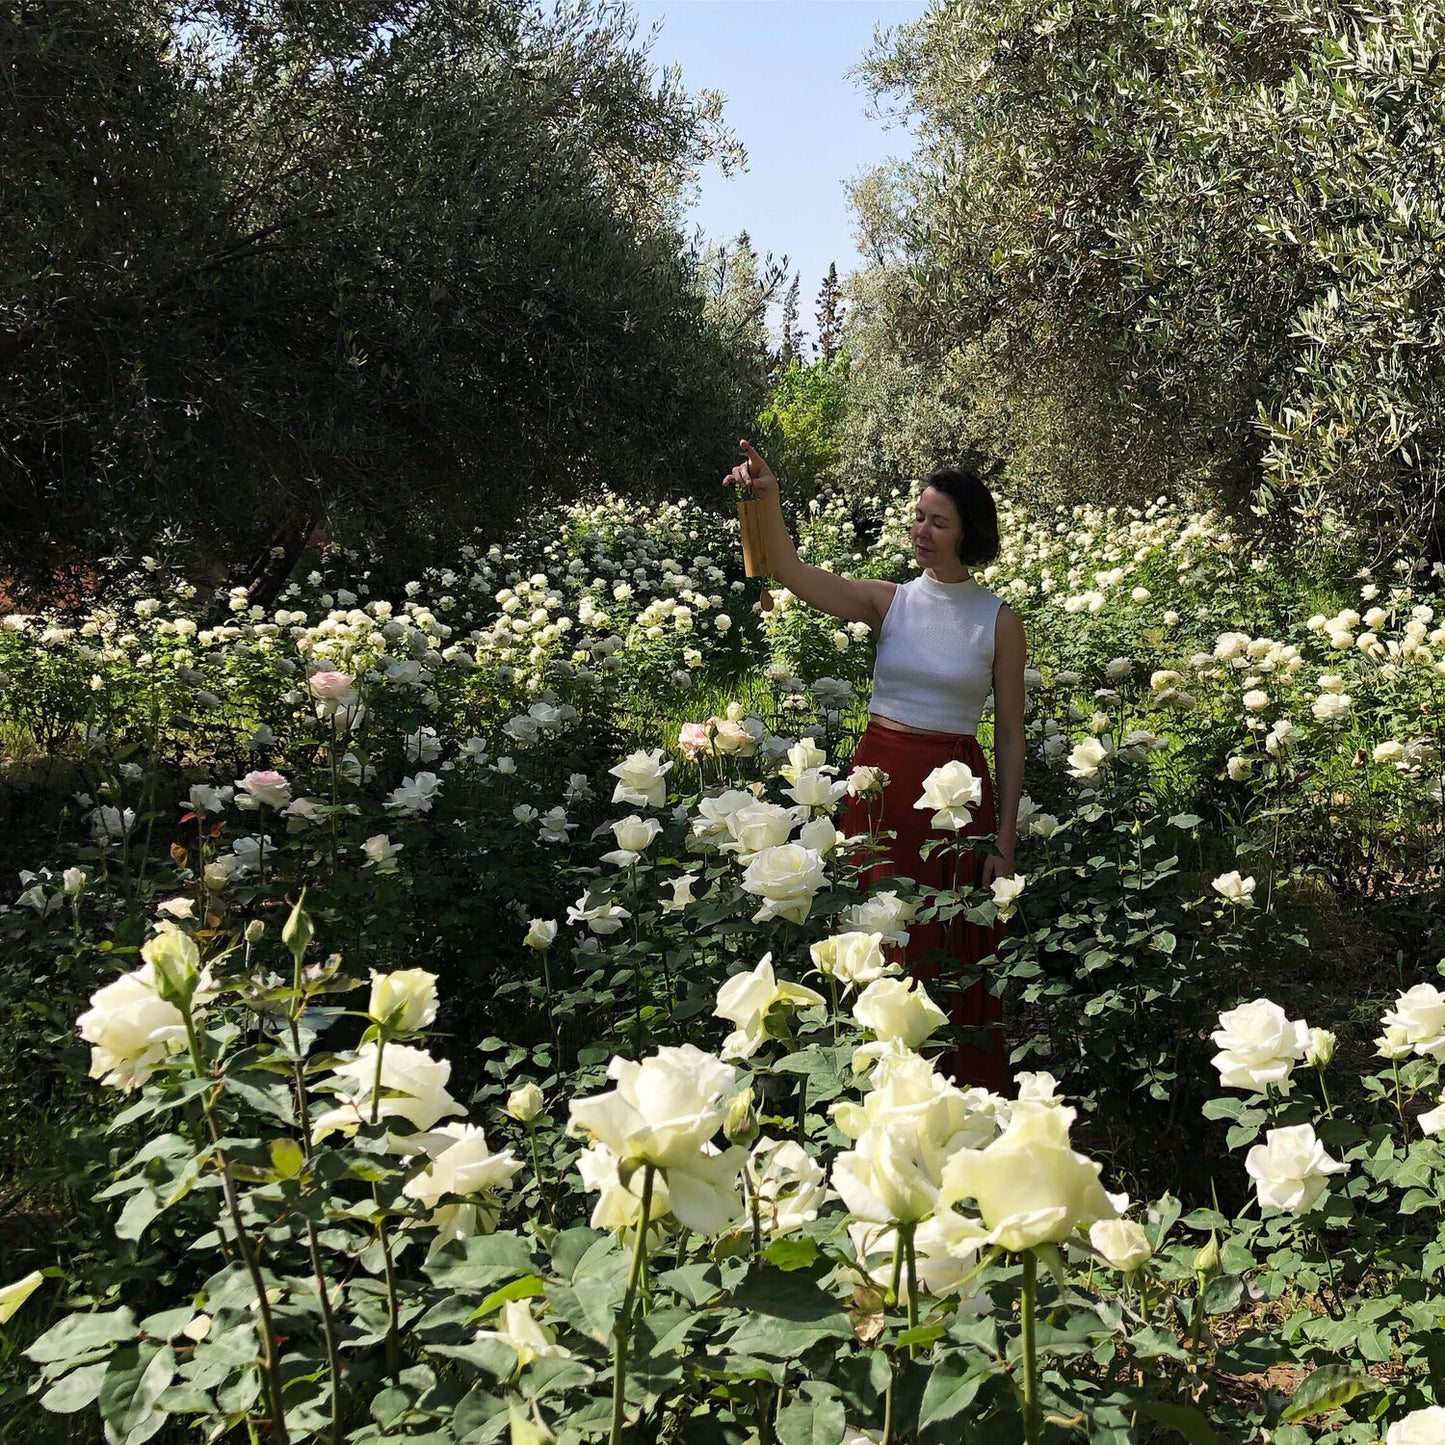 Kiko plays a koshi chime in a field of roses.